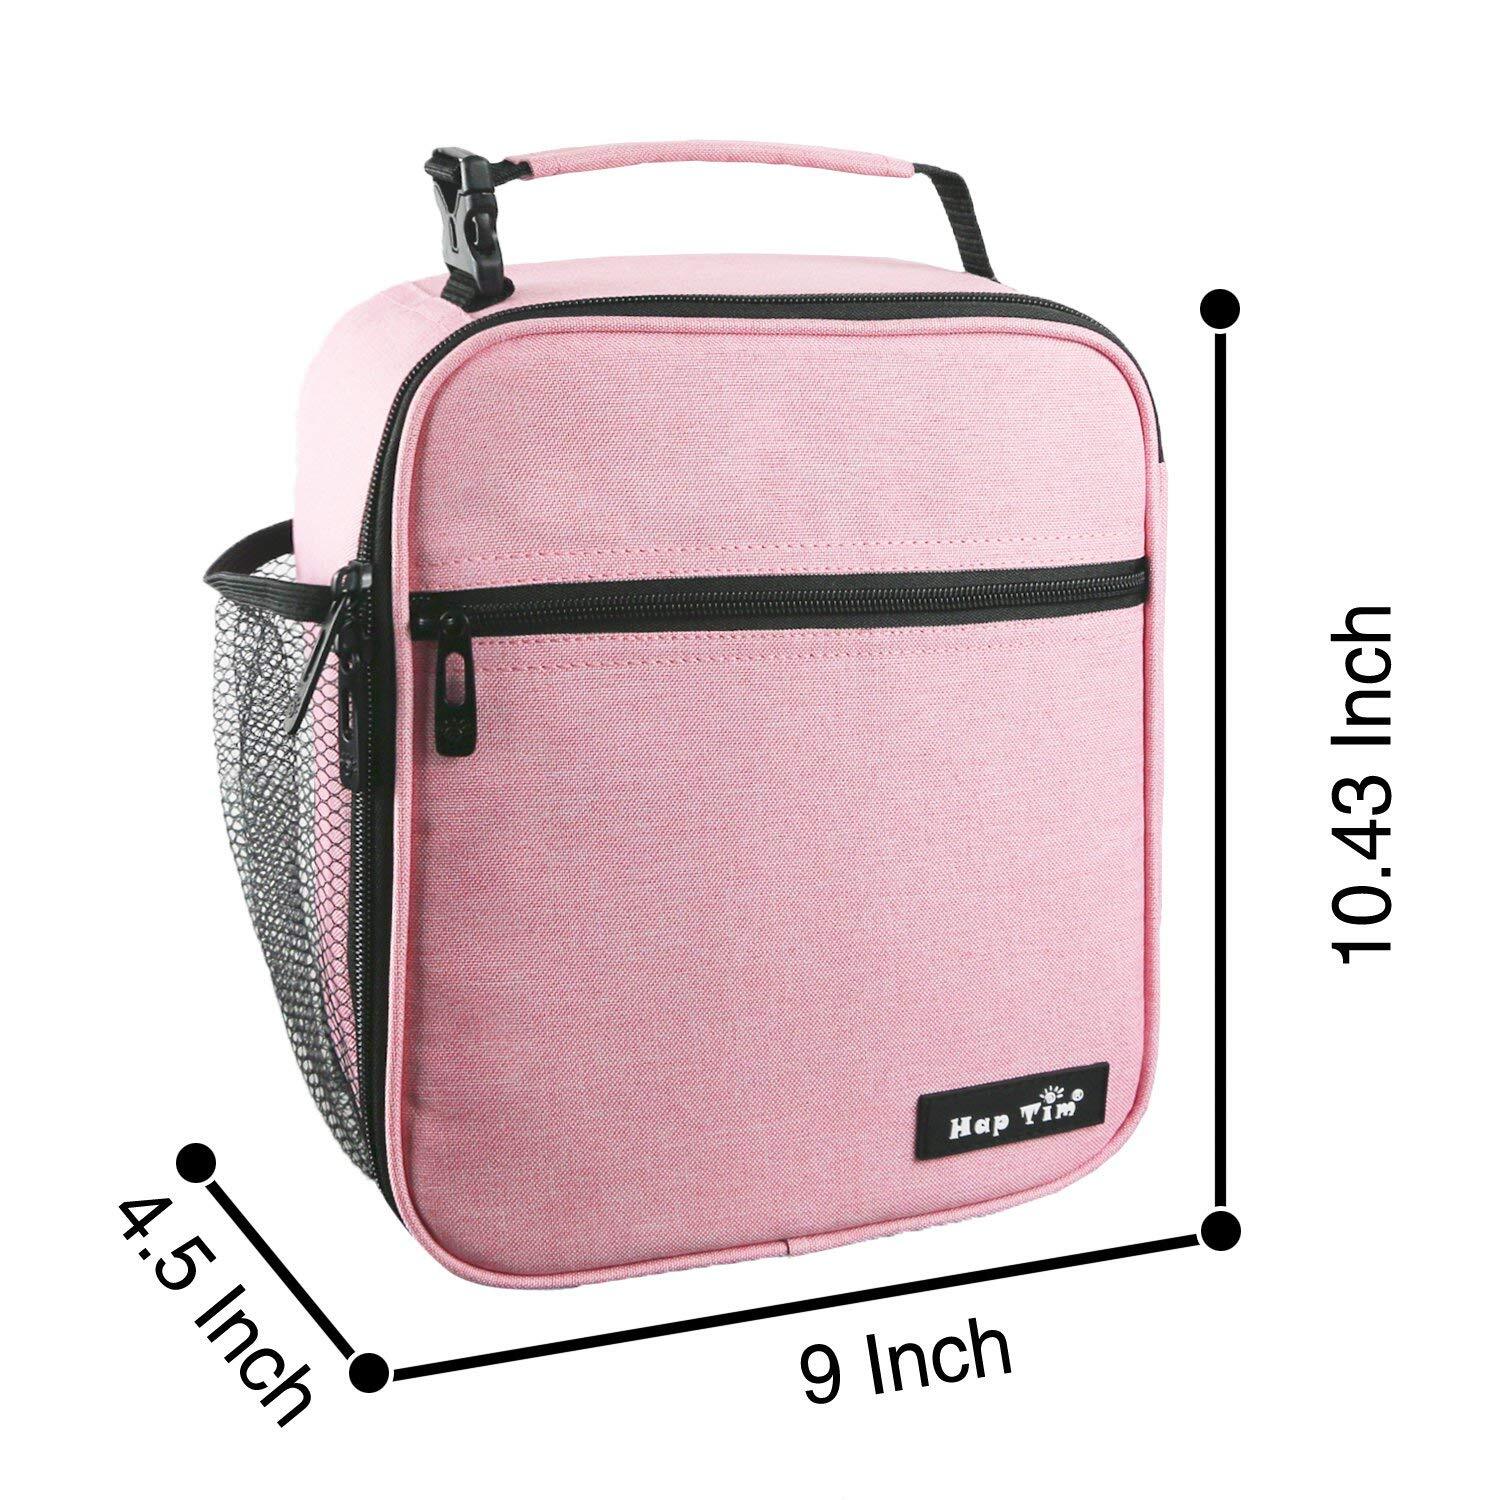 Insulated Lunch Box for Women, Lunch Bags for Women, Girls, Teens